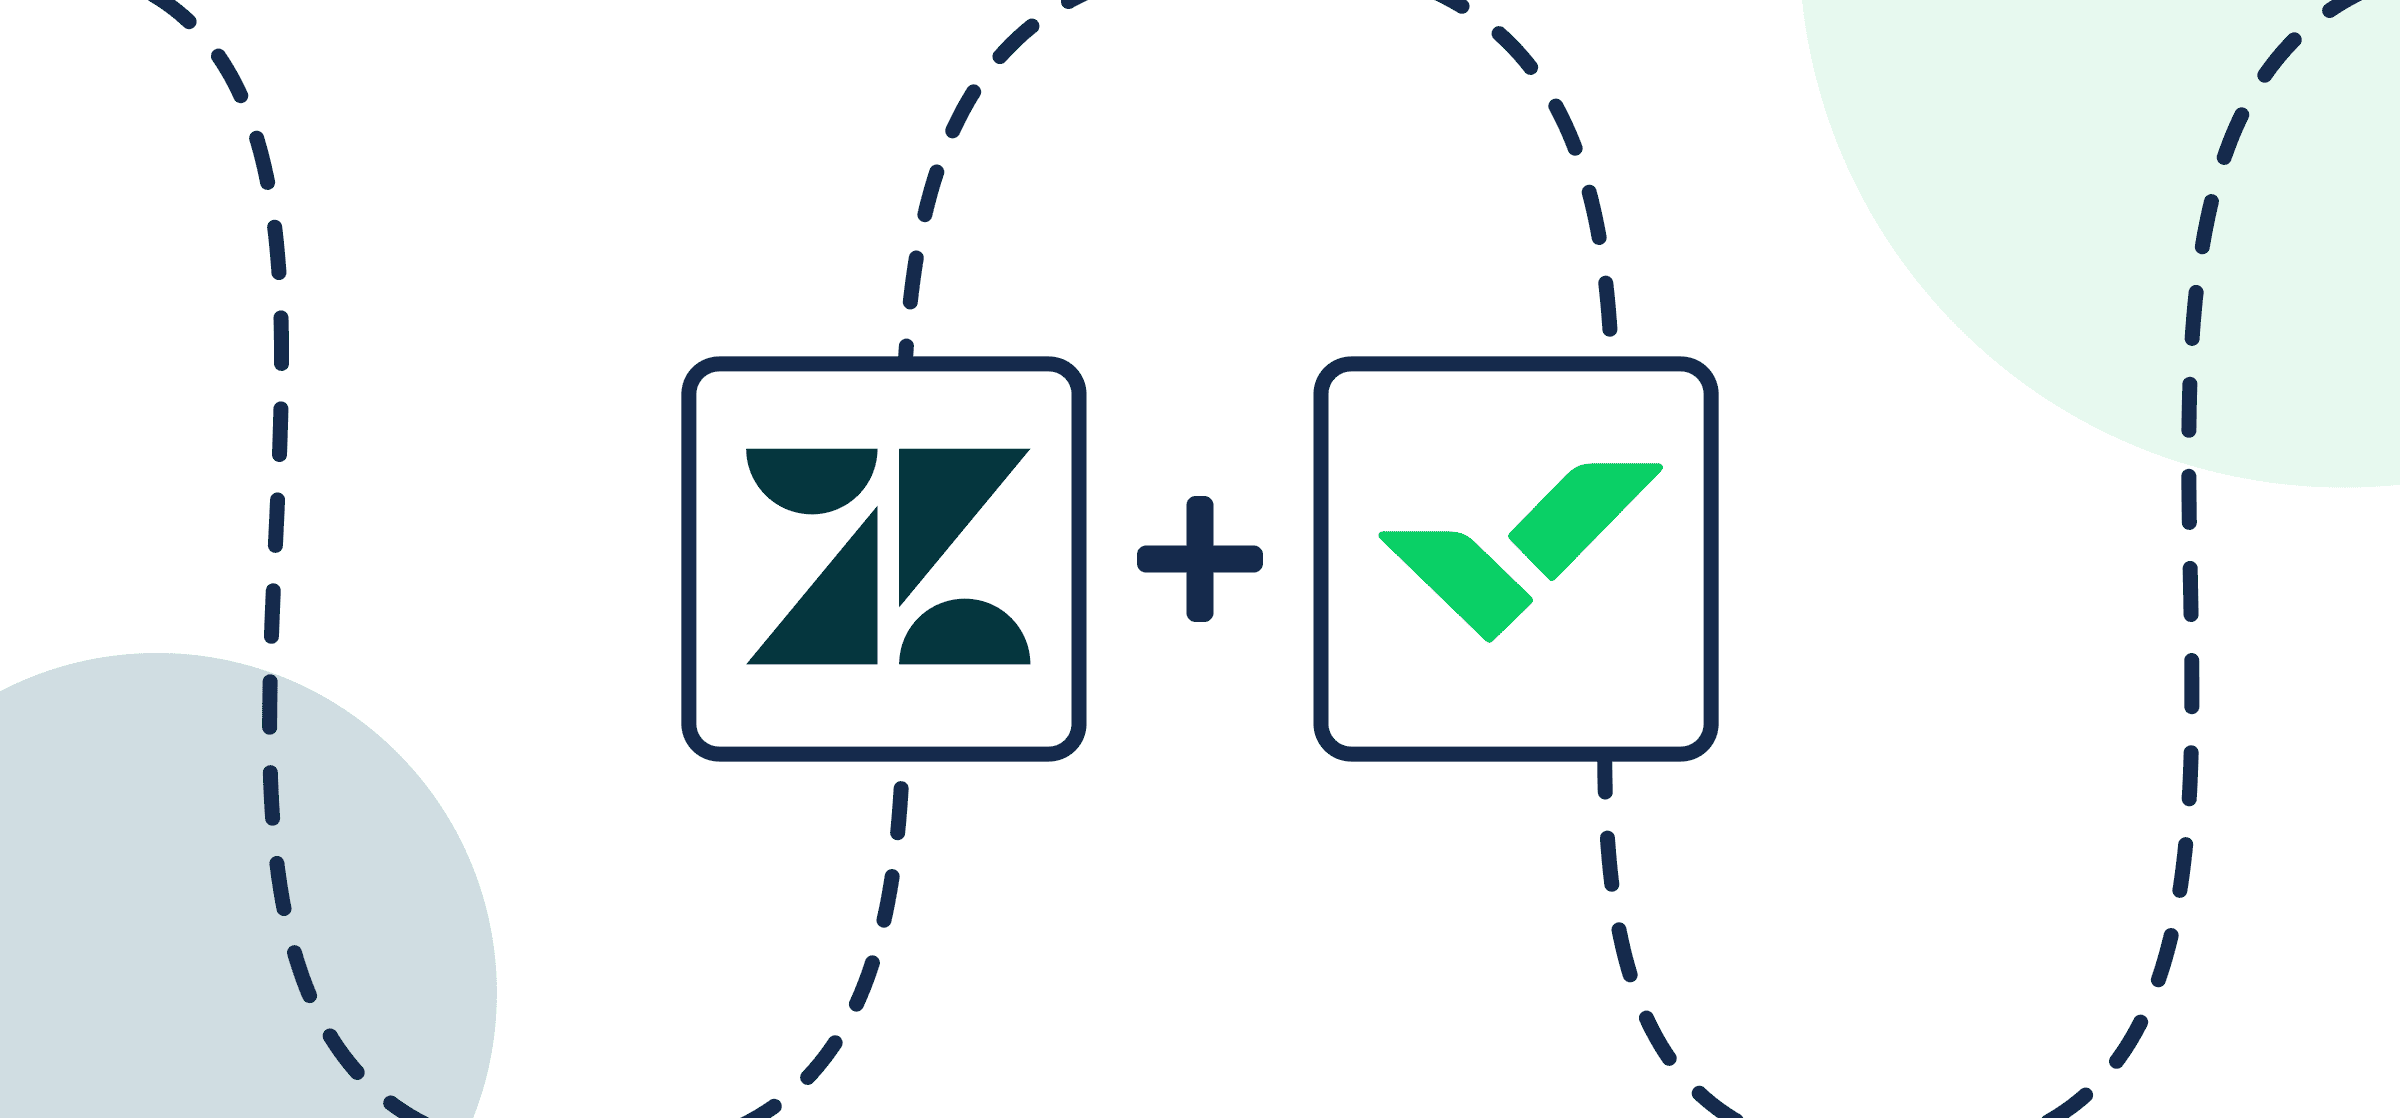 Featured image displaying the logos of Zendesk and Wrike in Unito's guide to setting up a simple Two-Way Sync.